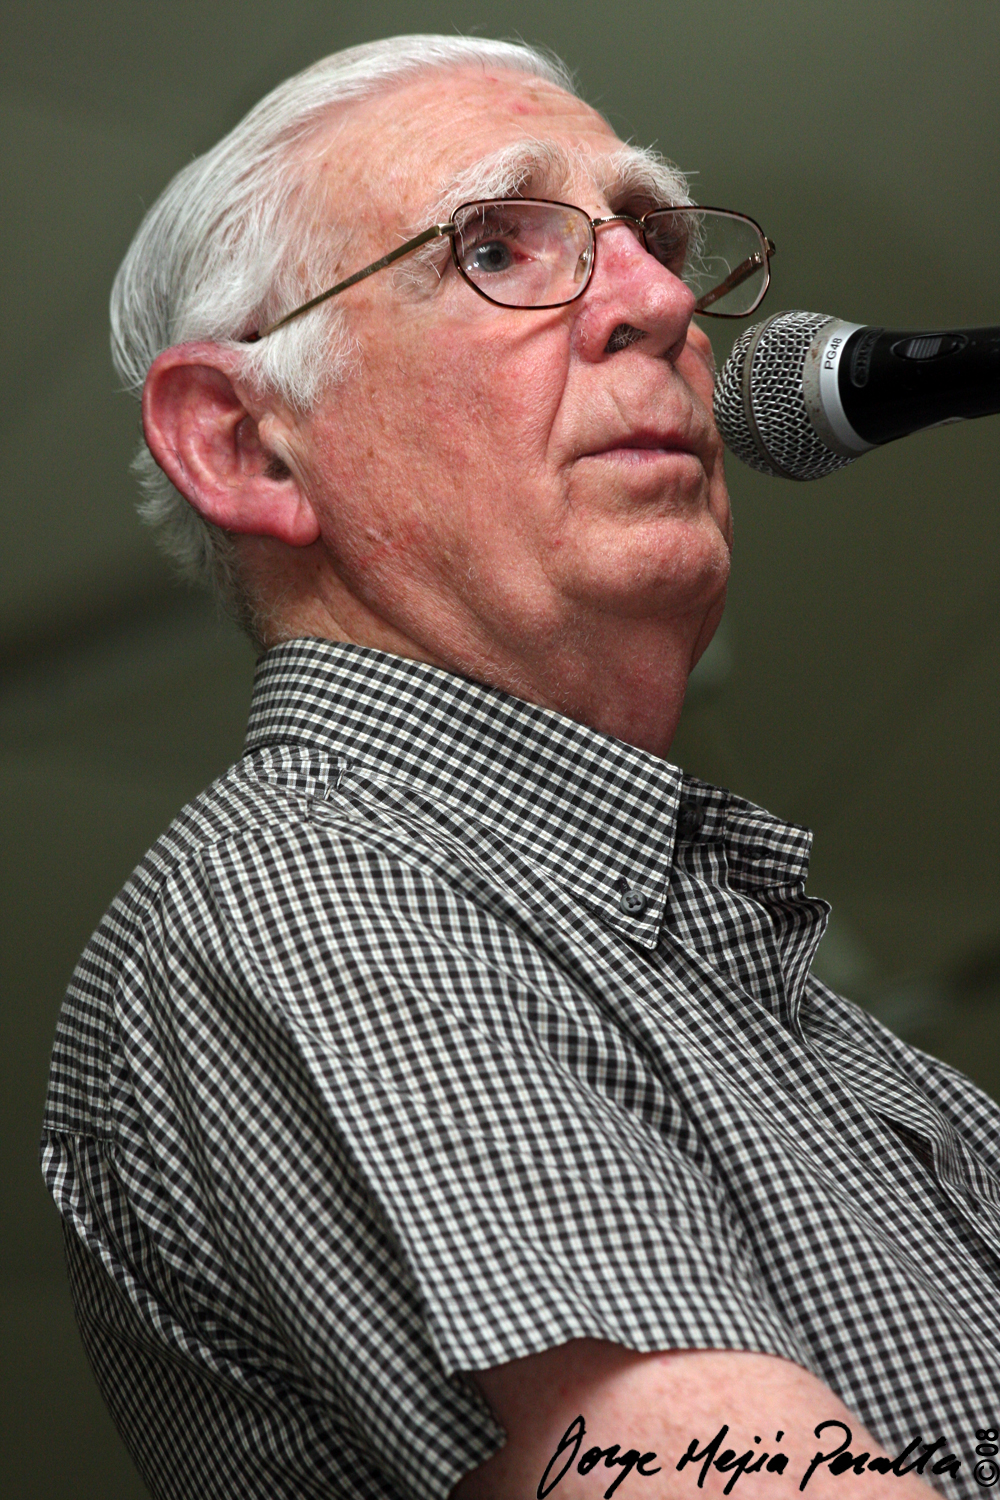 a man with white hair and glasses is singing into a microphone